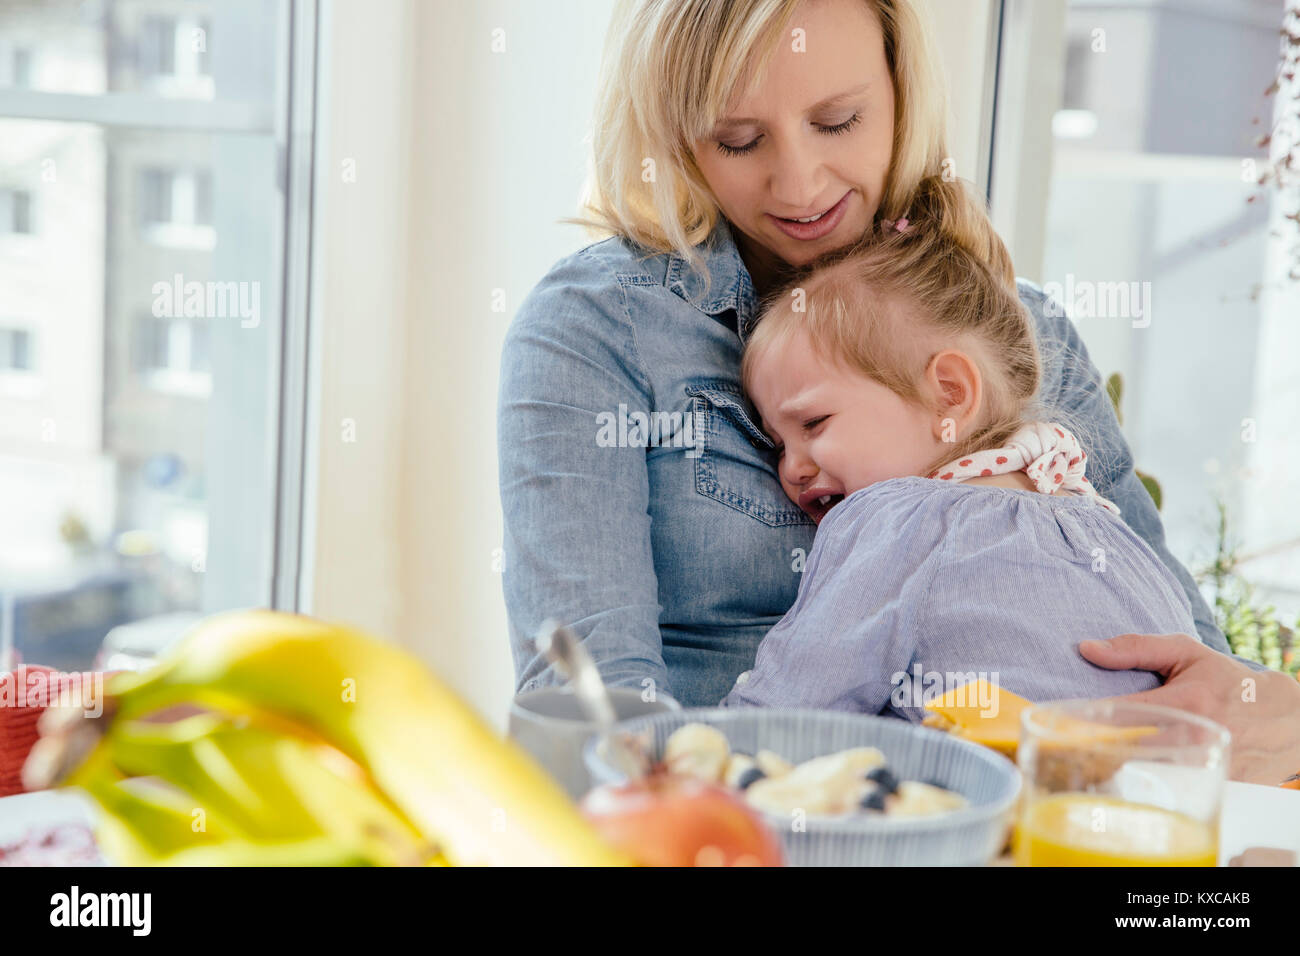 Little girl crying in mother's arms at breakfast table Stock Photo